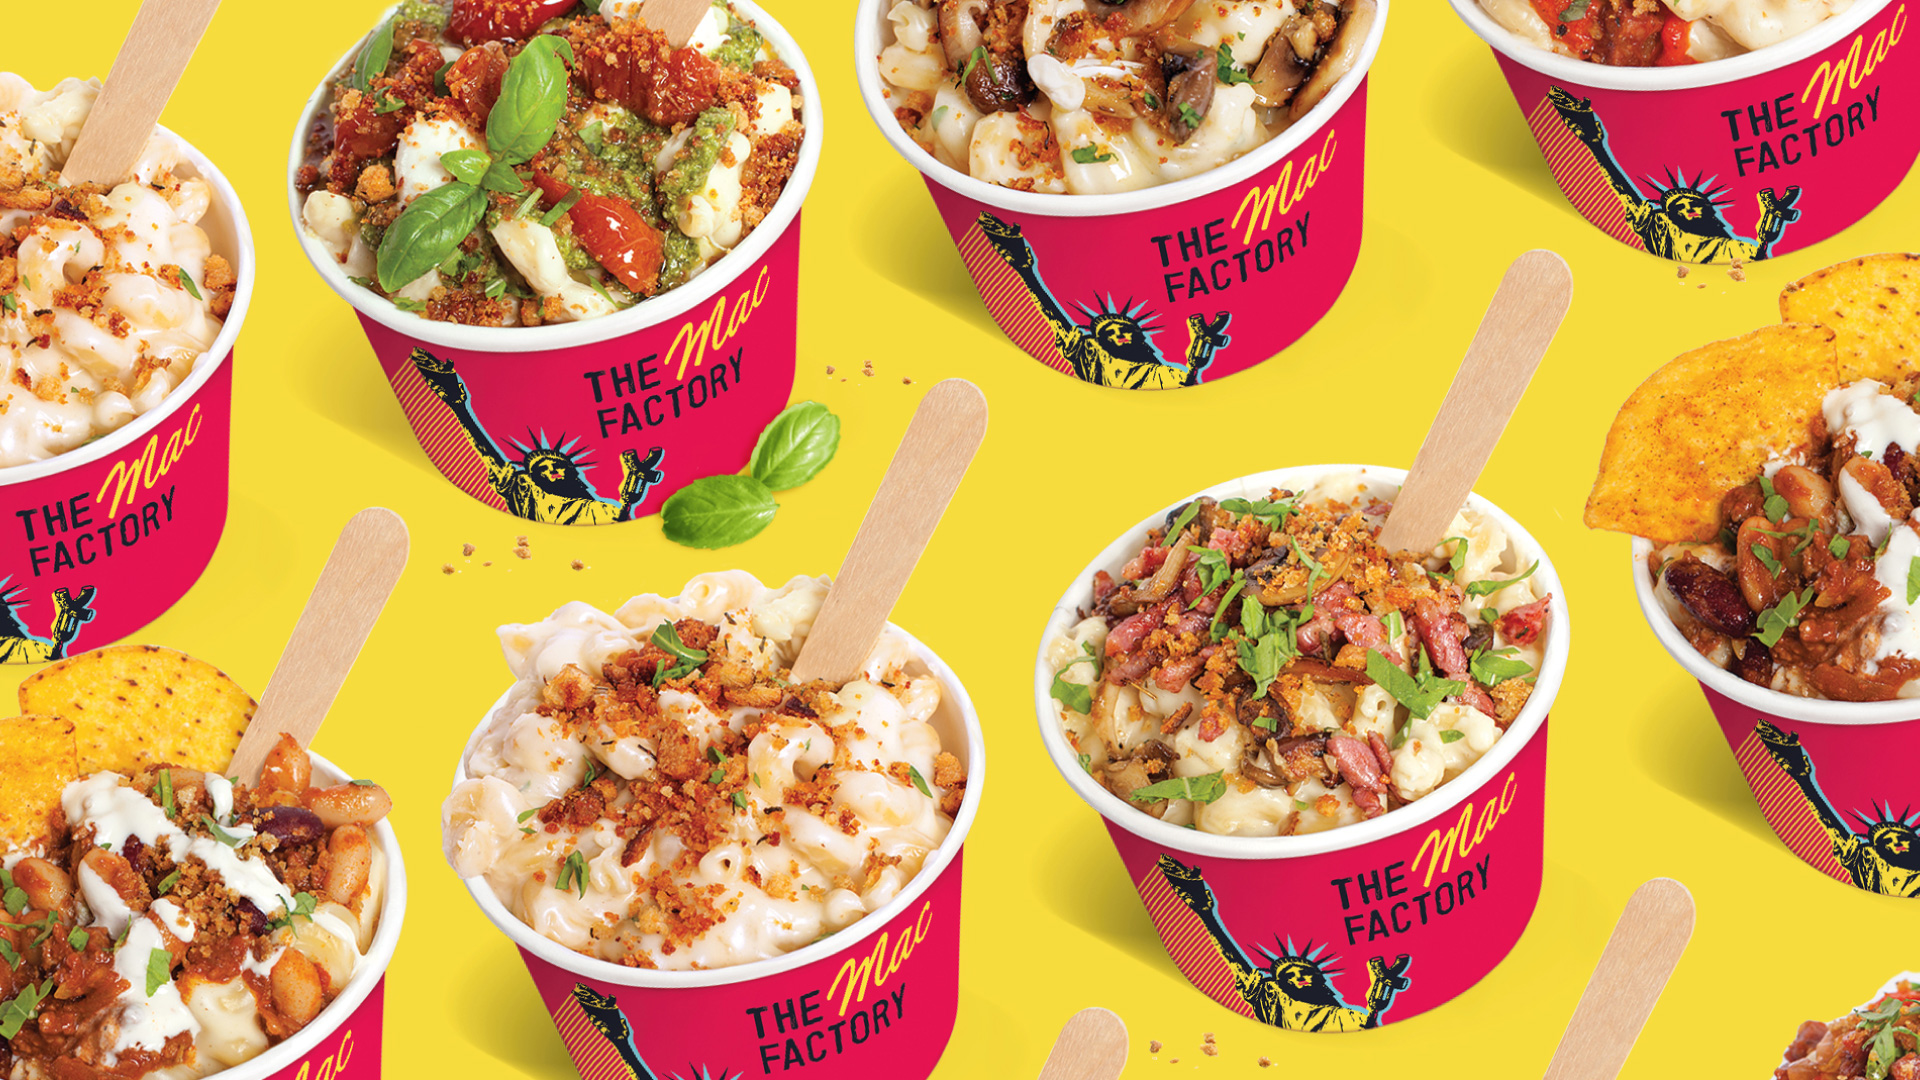 Consumer Rebranding for Mac & Cheese Store the All-American Classic for the British Market